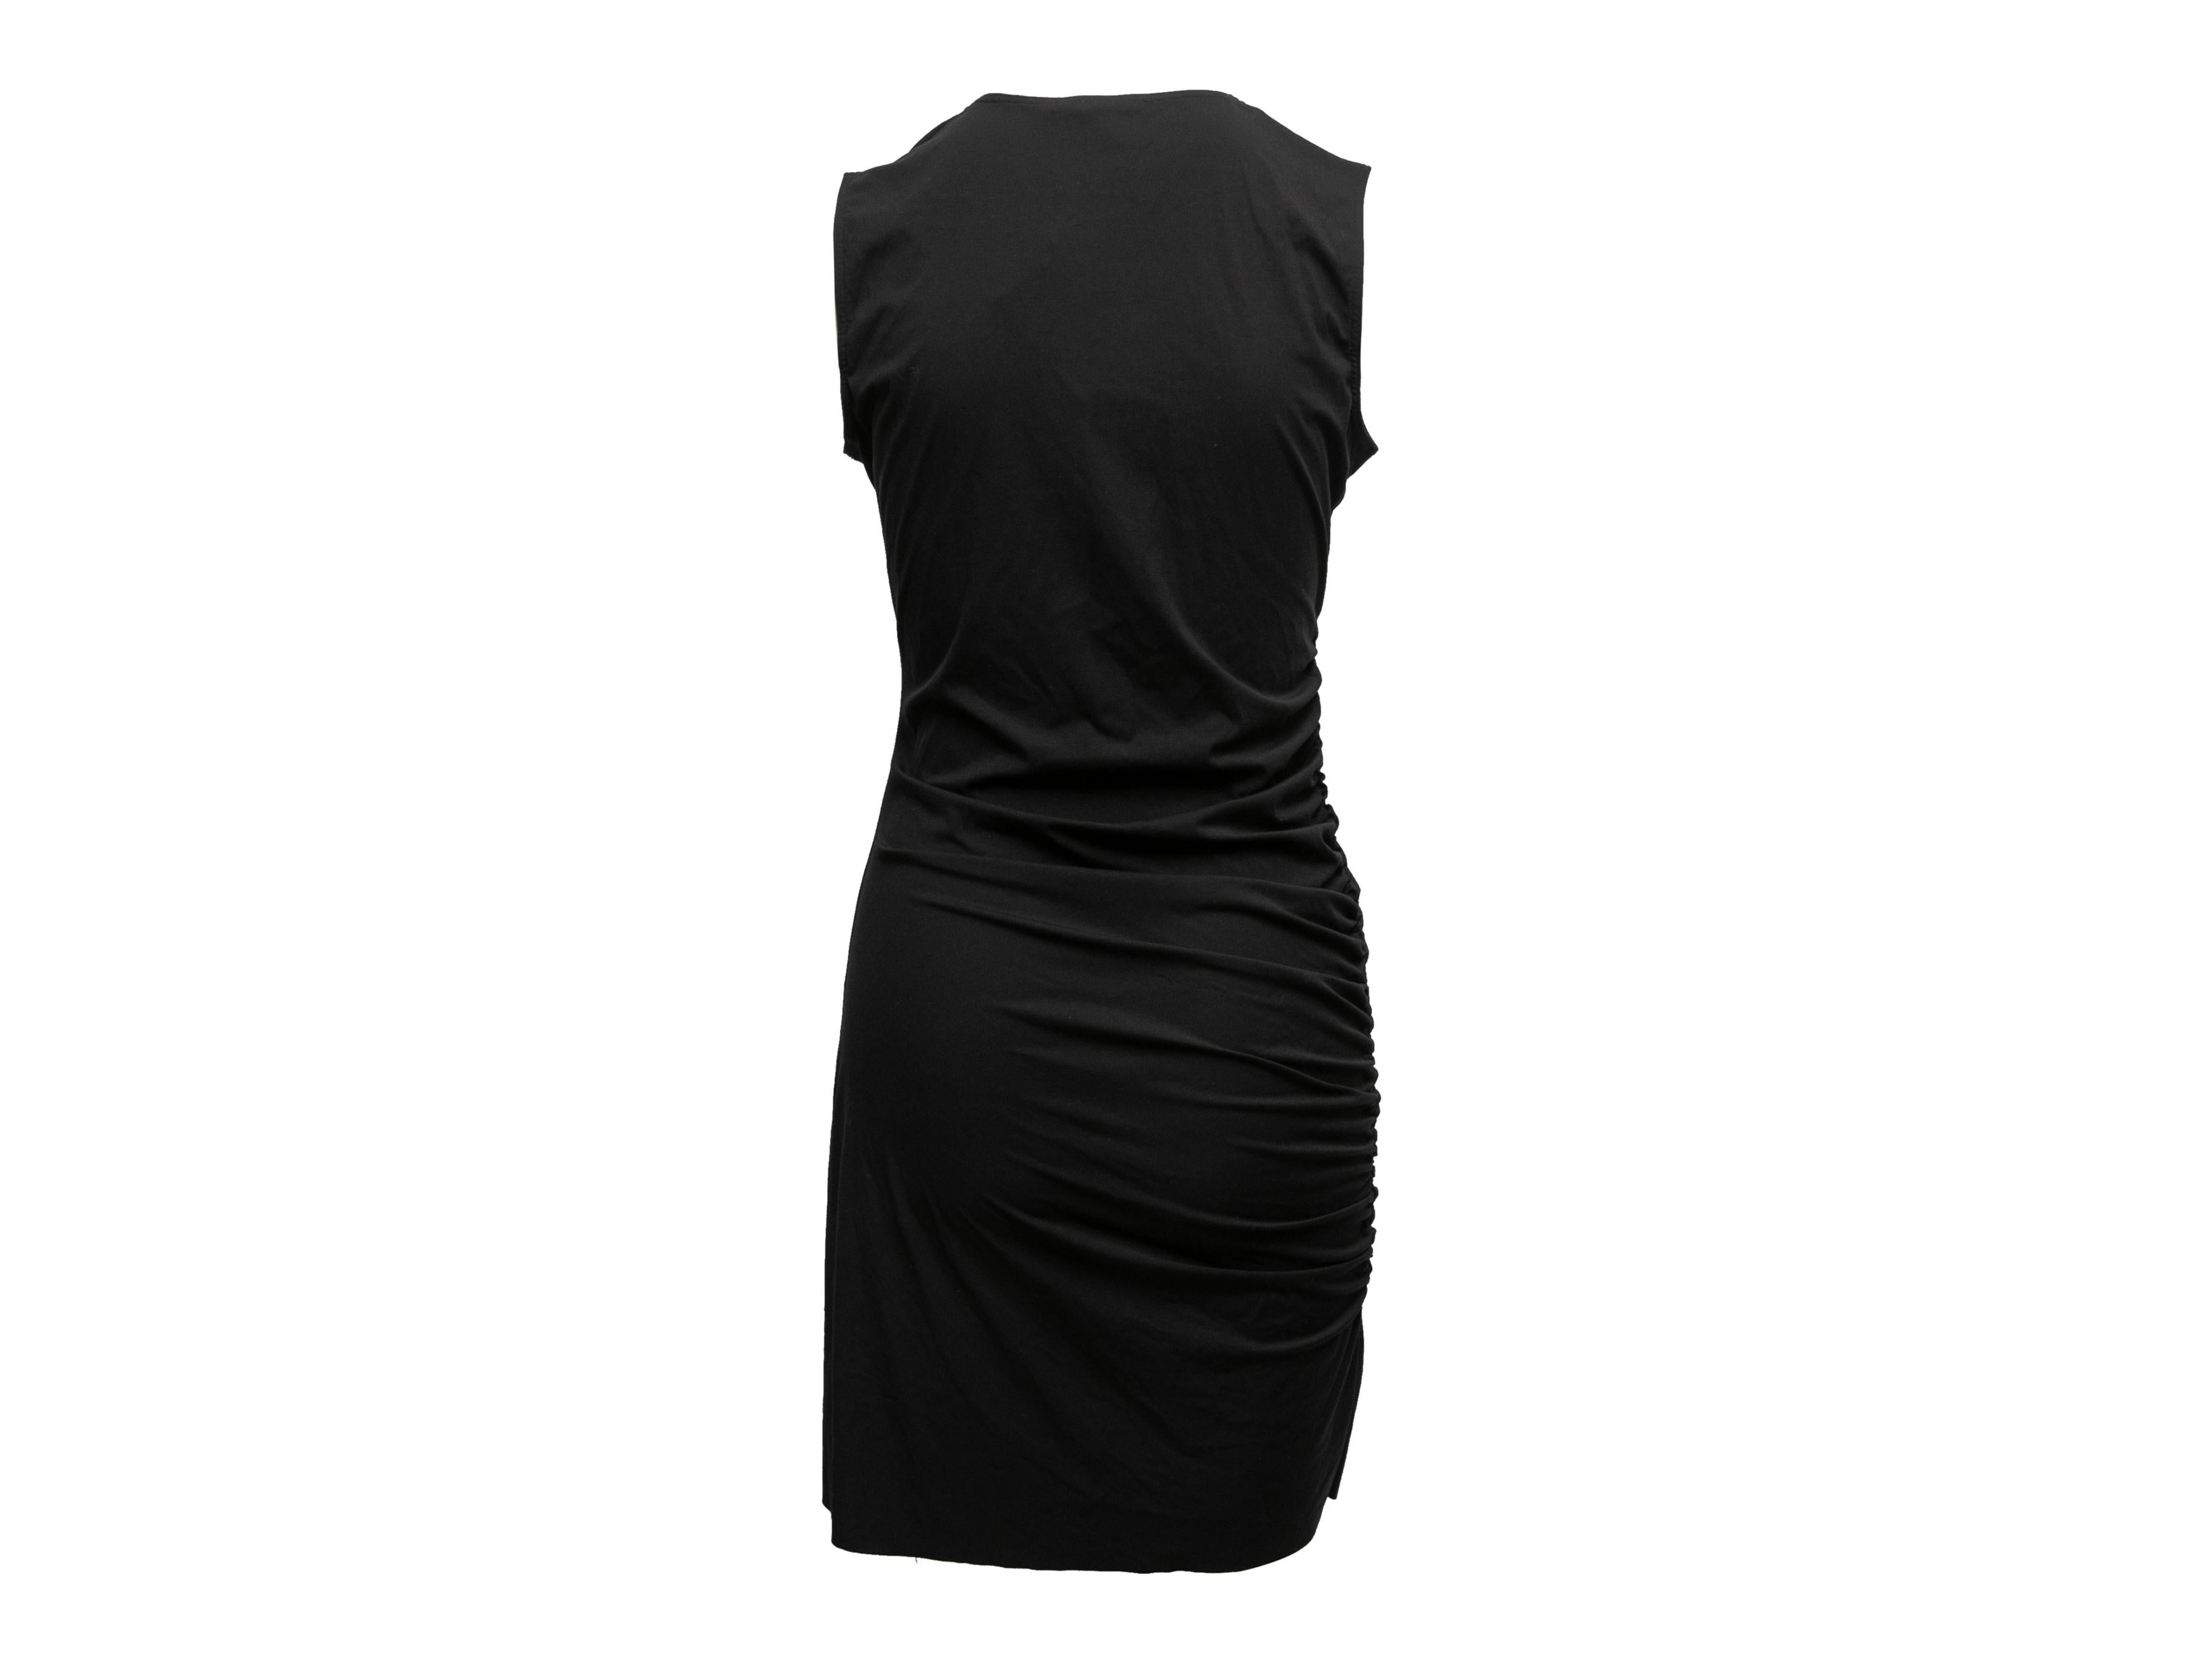 Black Amina Muaddi x Wolford Sleeveless Bodycon Dress Size US M In Excellent Condition For Sale In New York, NY